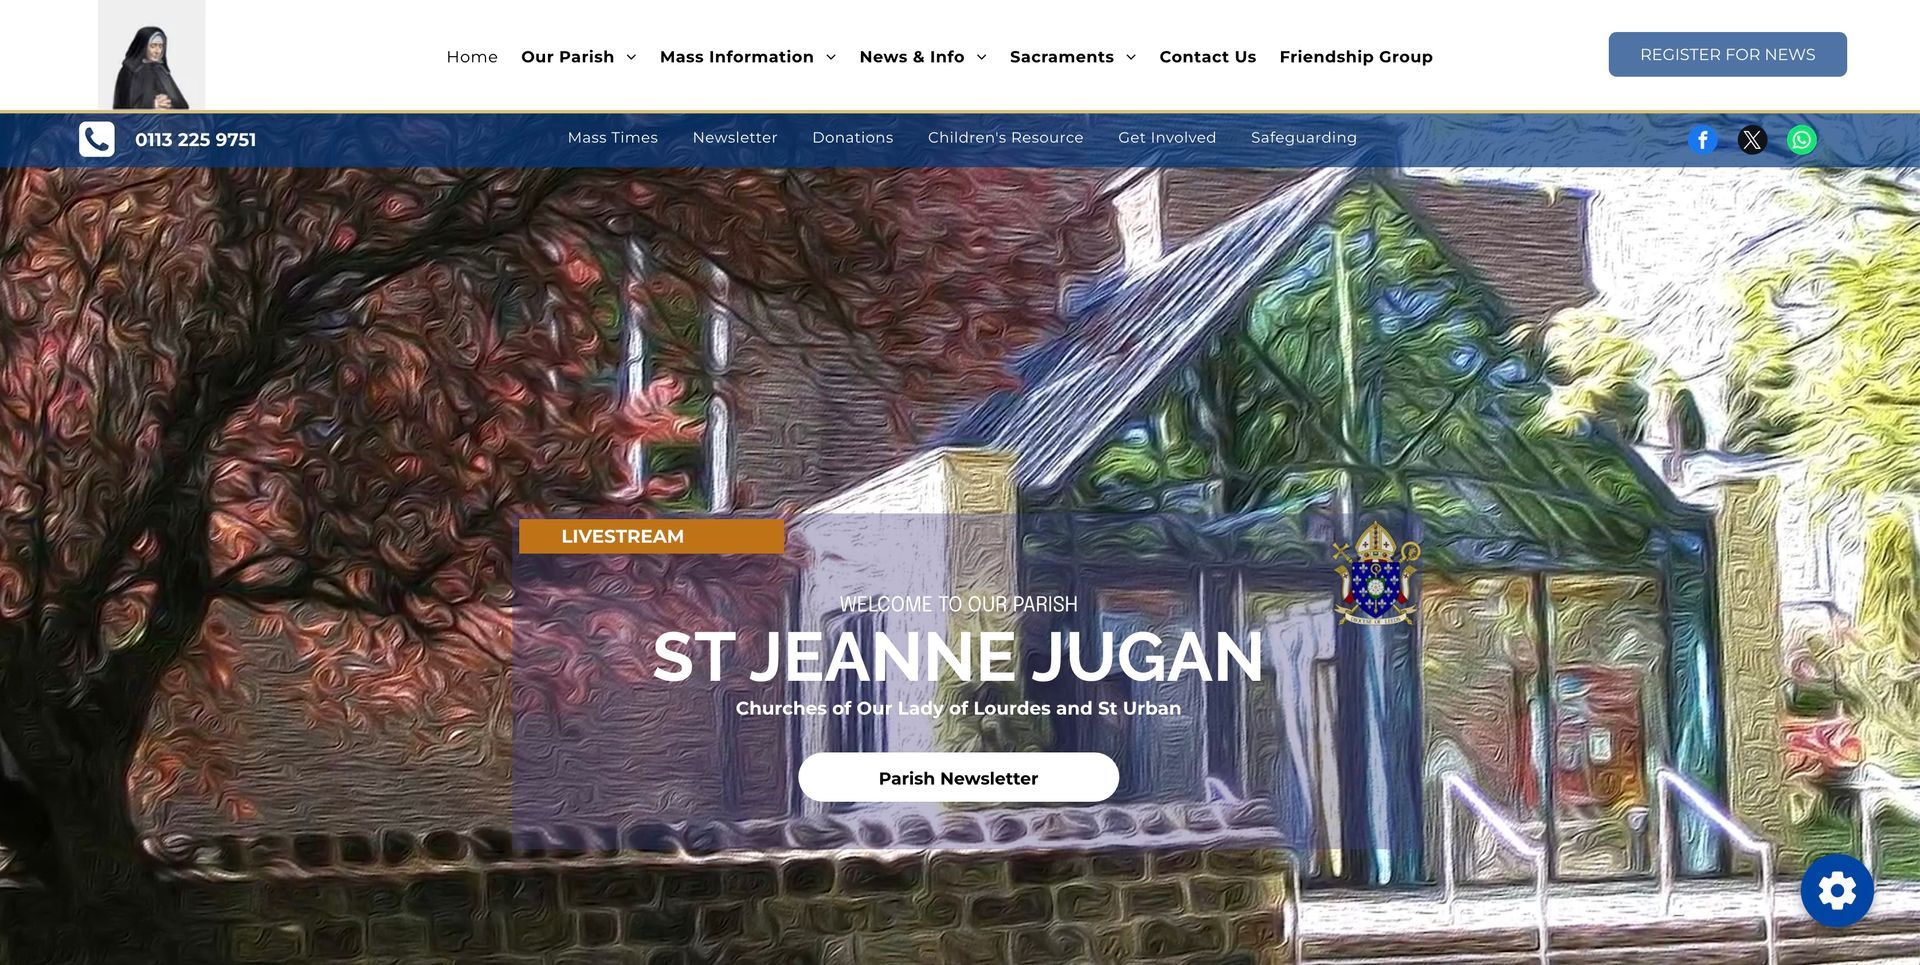 A screenshot of the website for st. jeanne jugan.